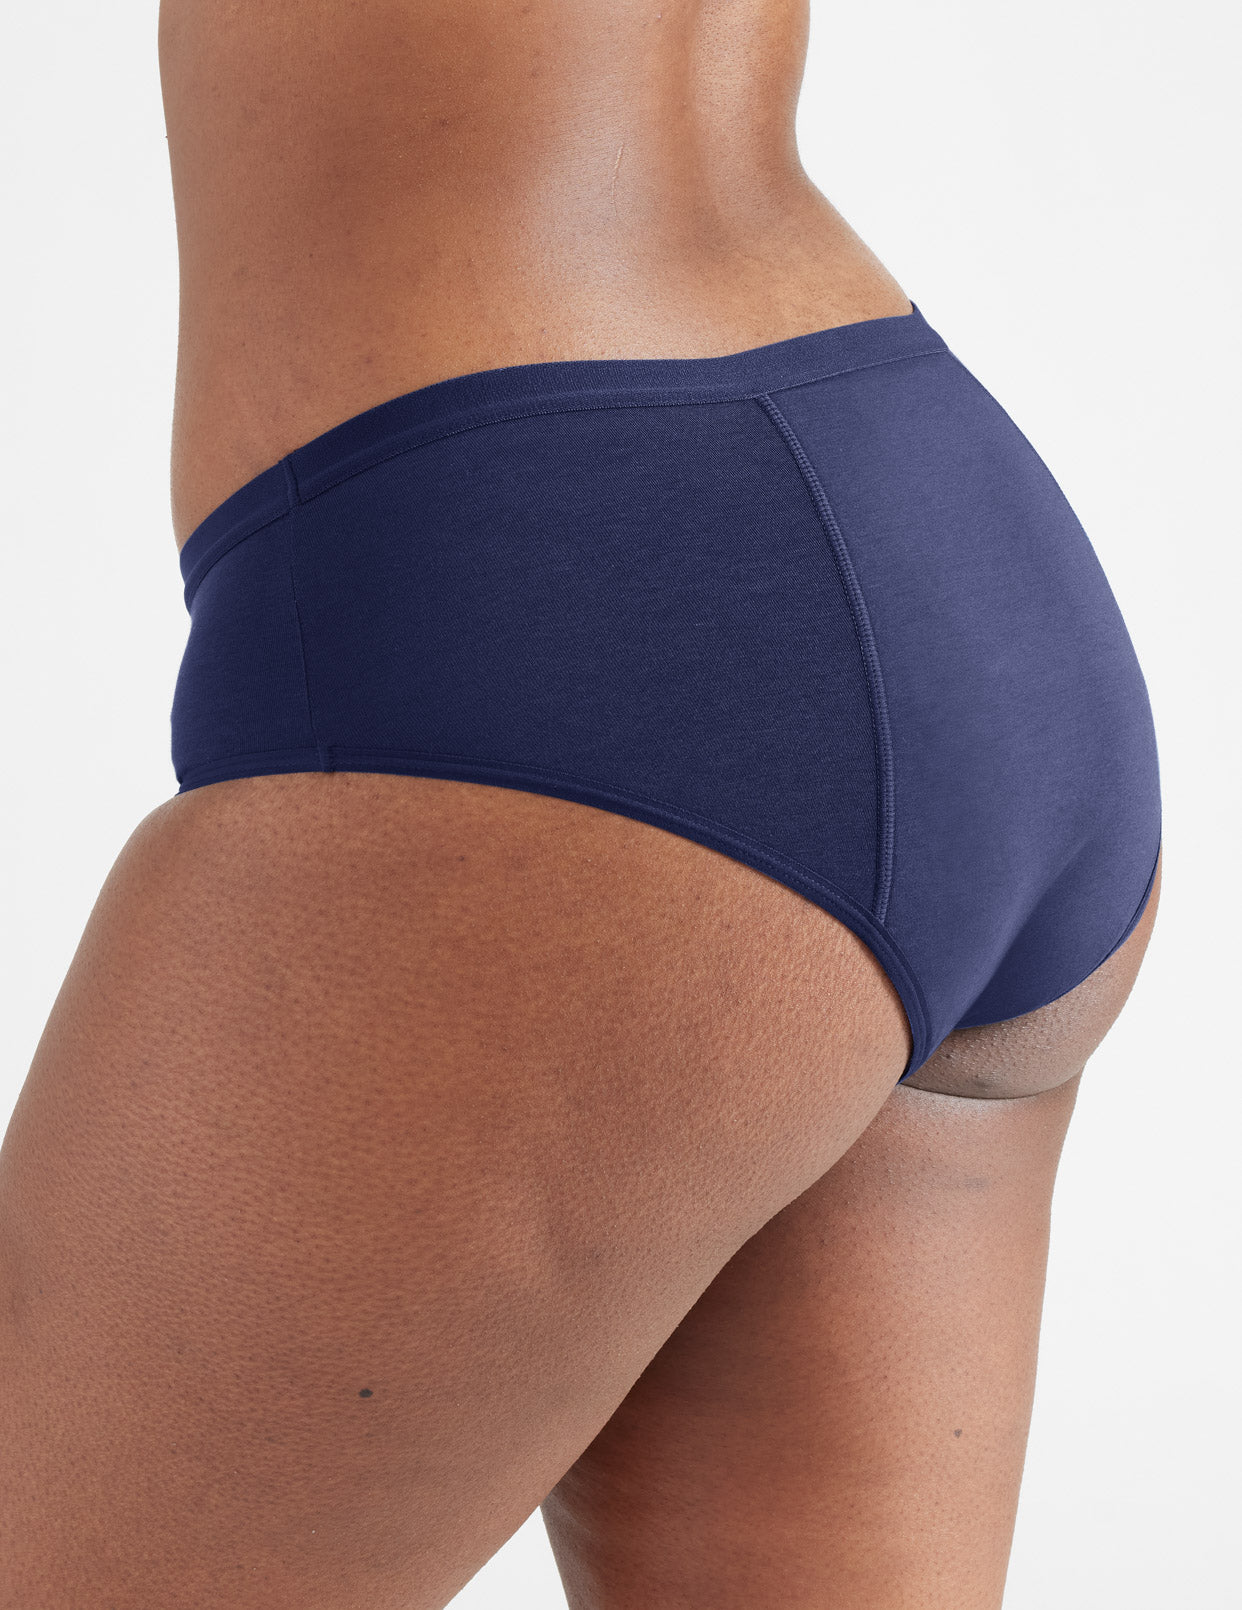 Knix loungewear review: the underwear brand now makes cozy sets